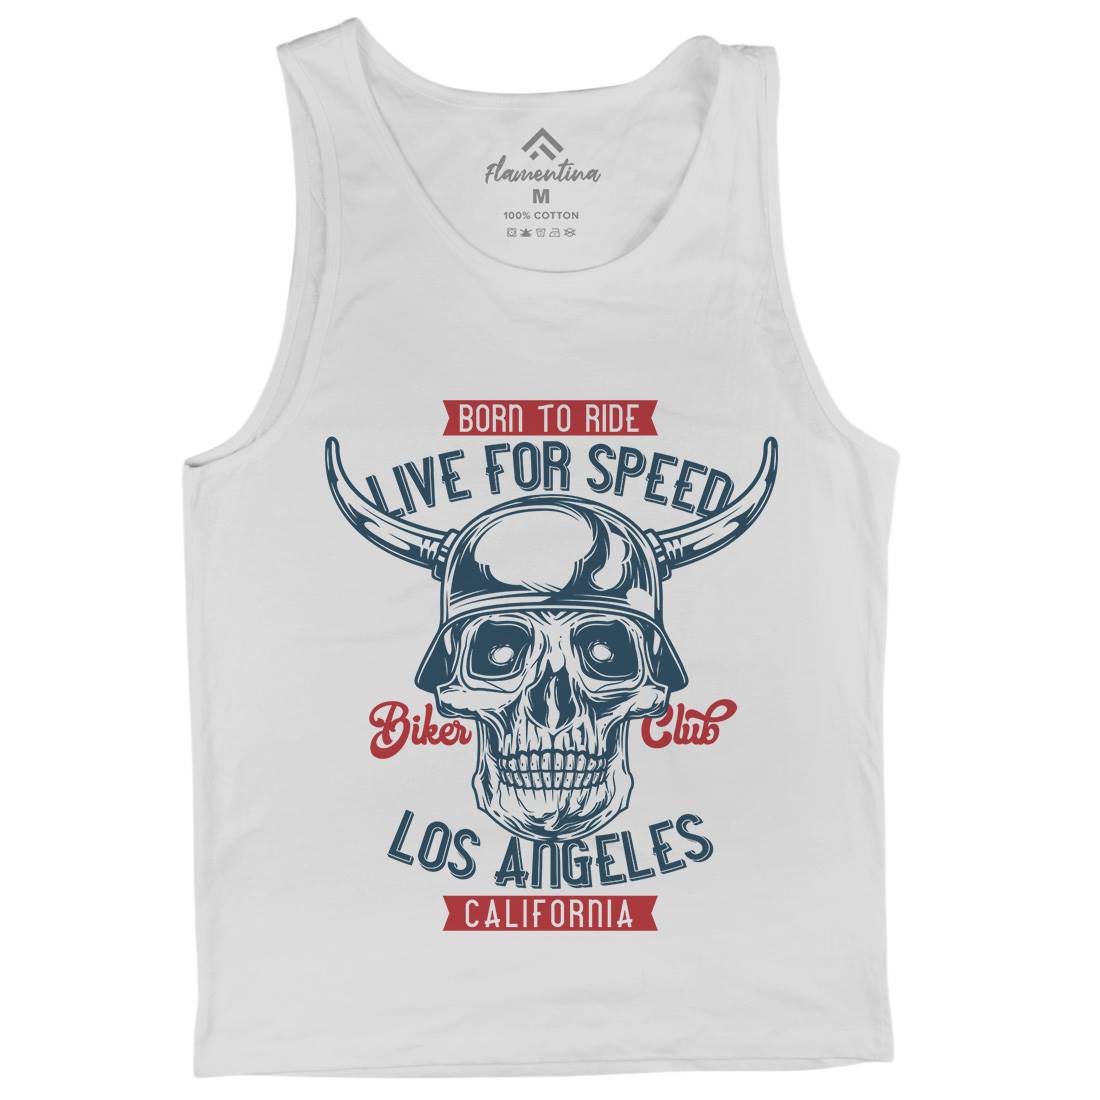 Live For Speed Mens Tank Top Vest Motorcycles B851